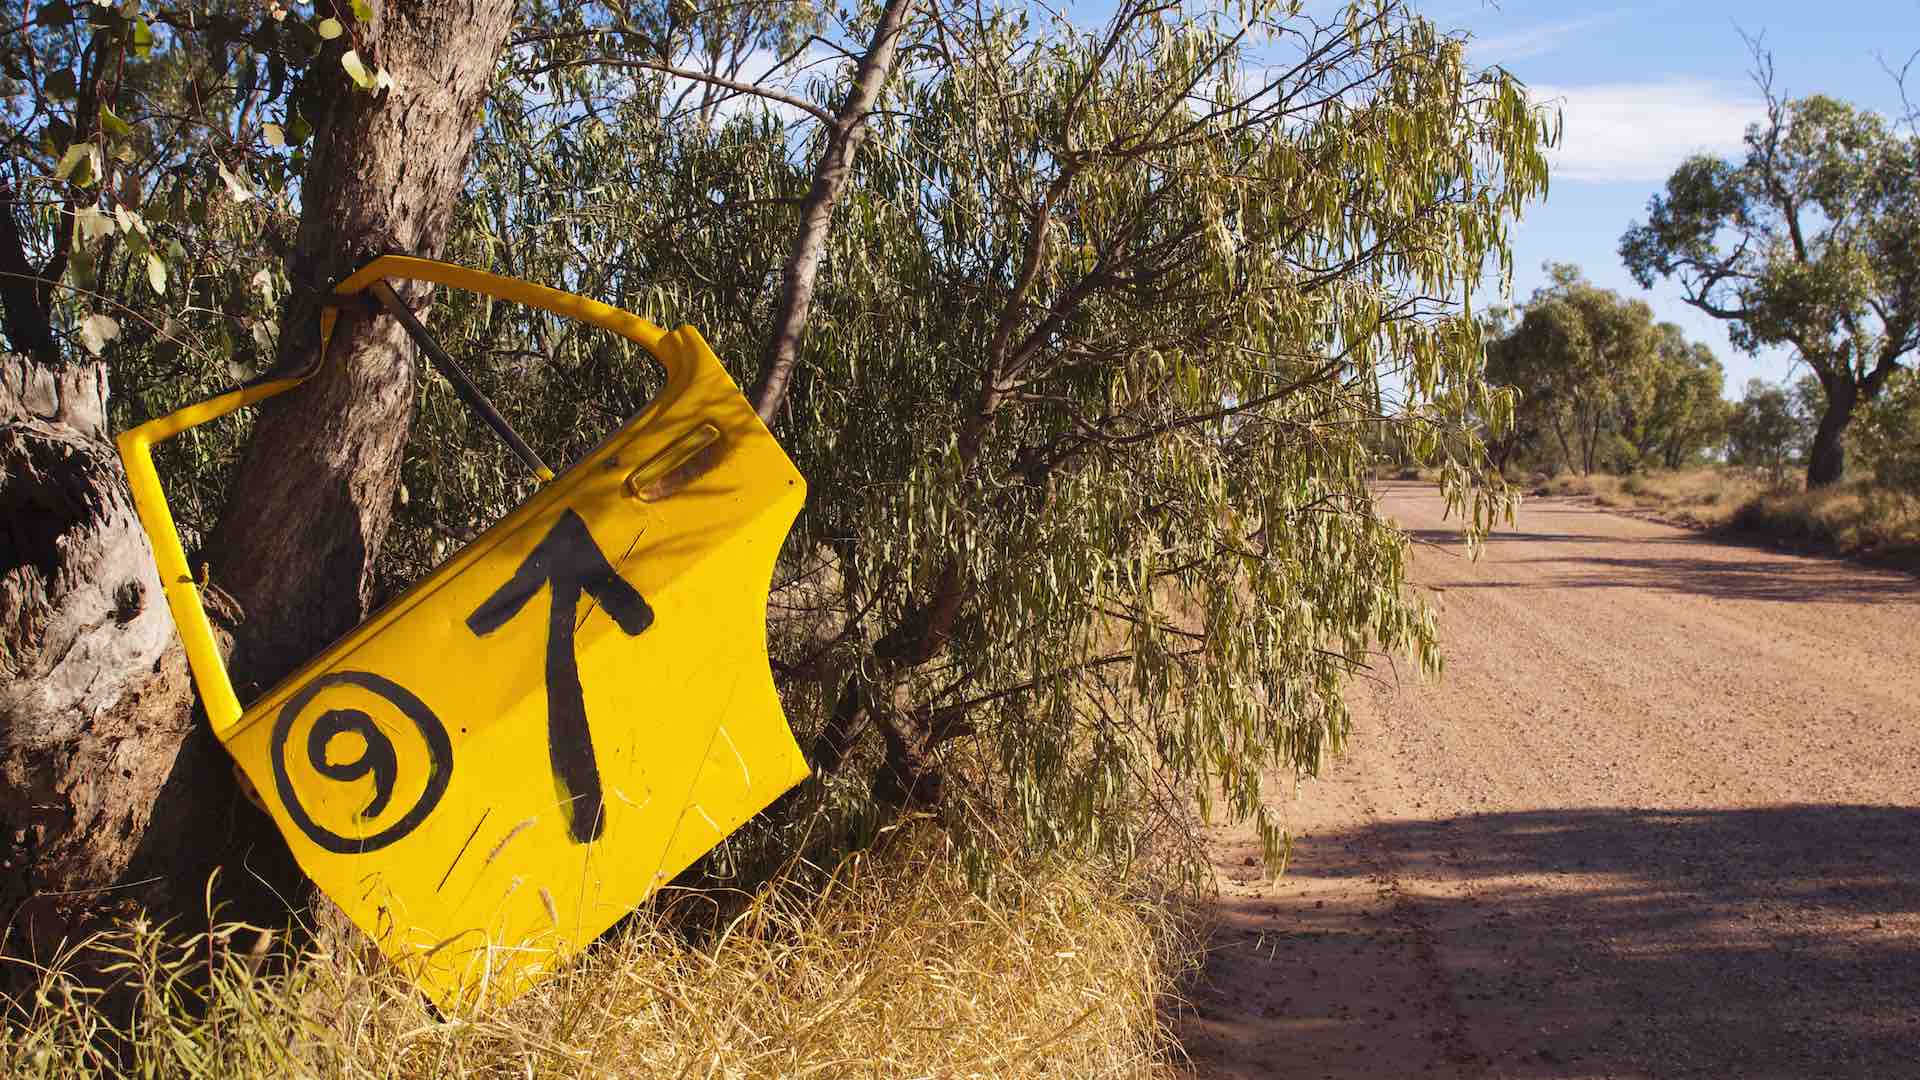 Old yellow car door used as a street sign in outback Australia